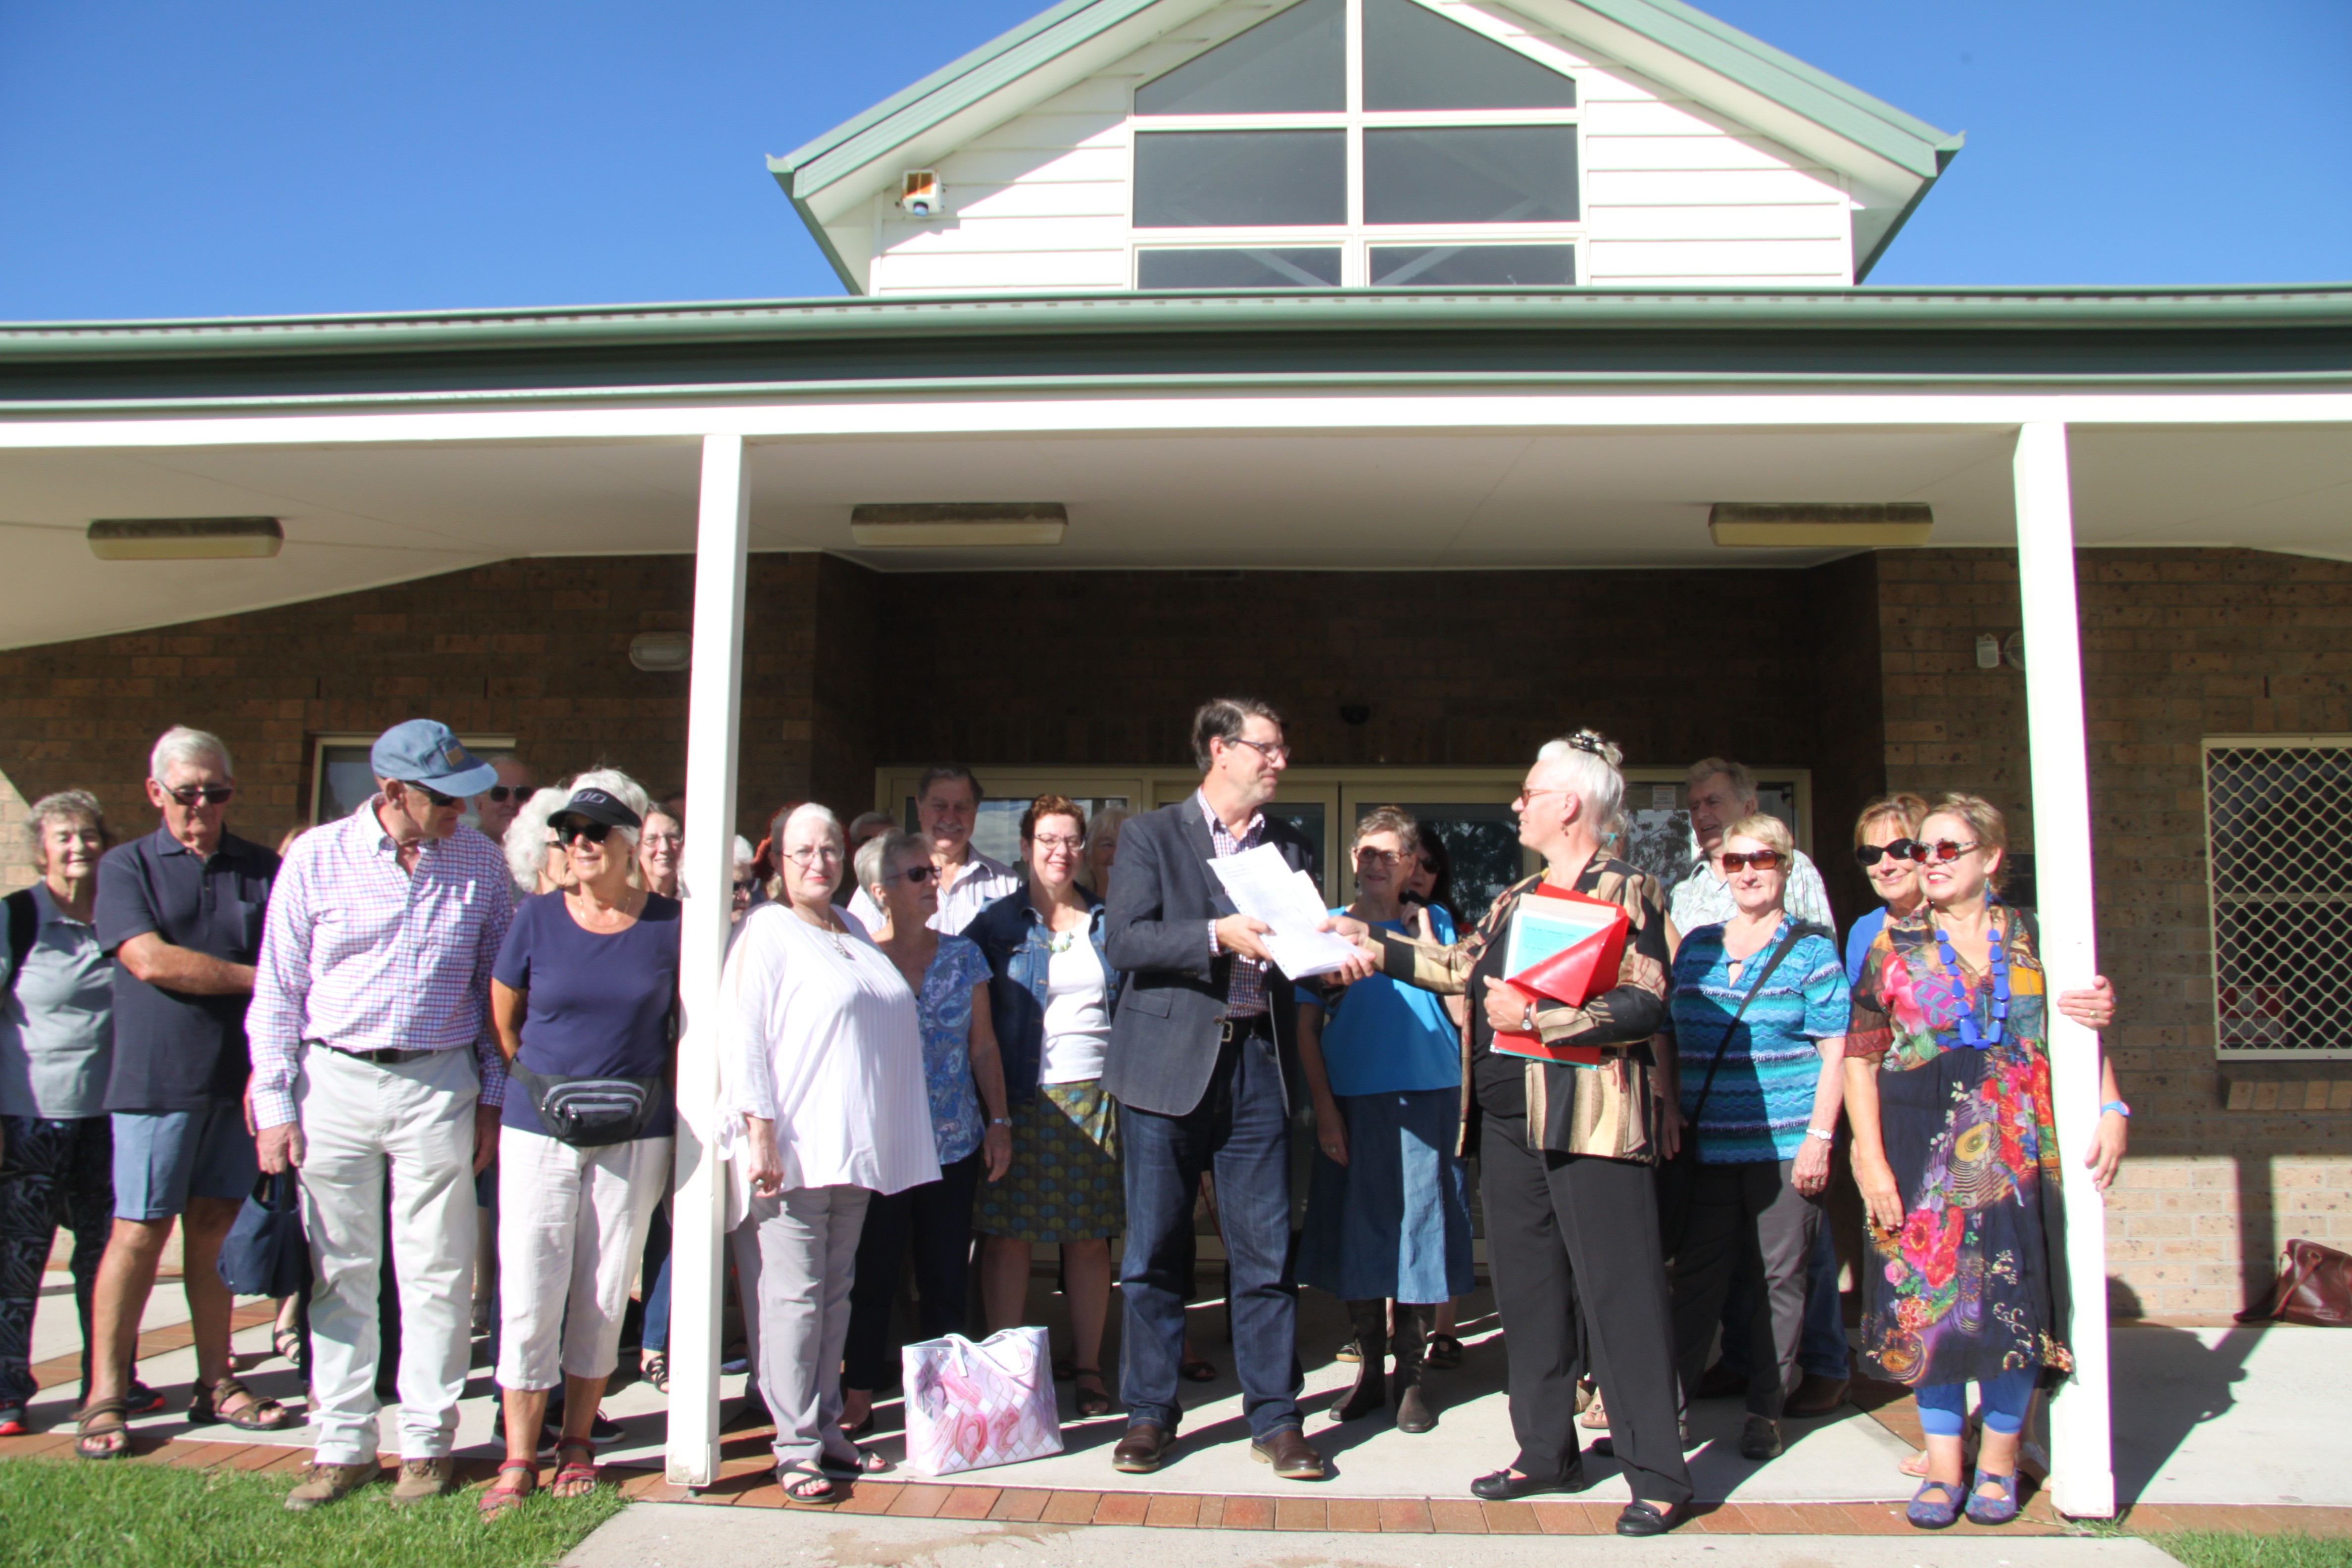 Batemans Bay Community Centre petition attracts over 1000 signatures